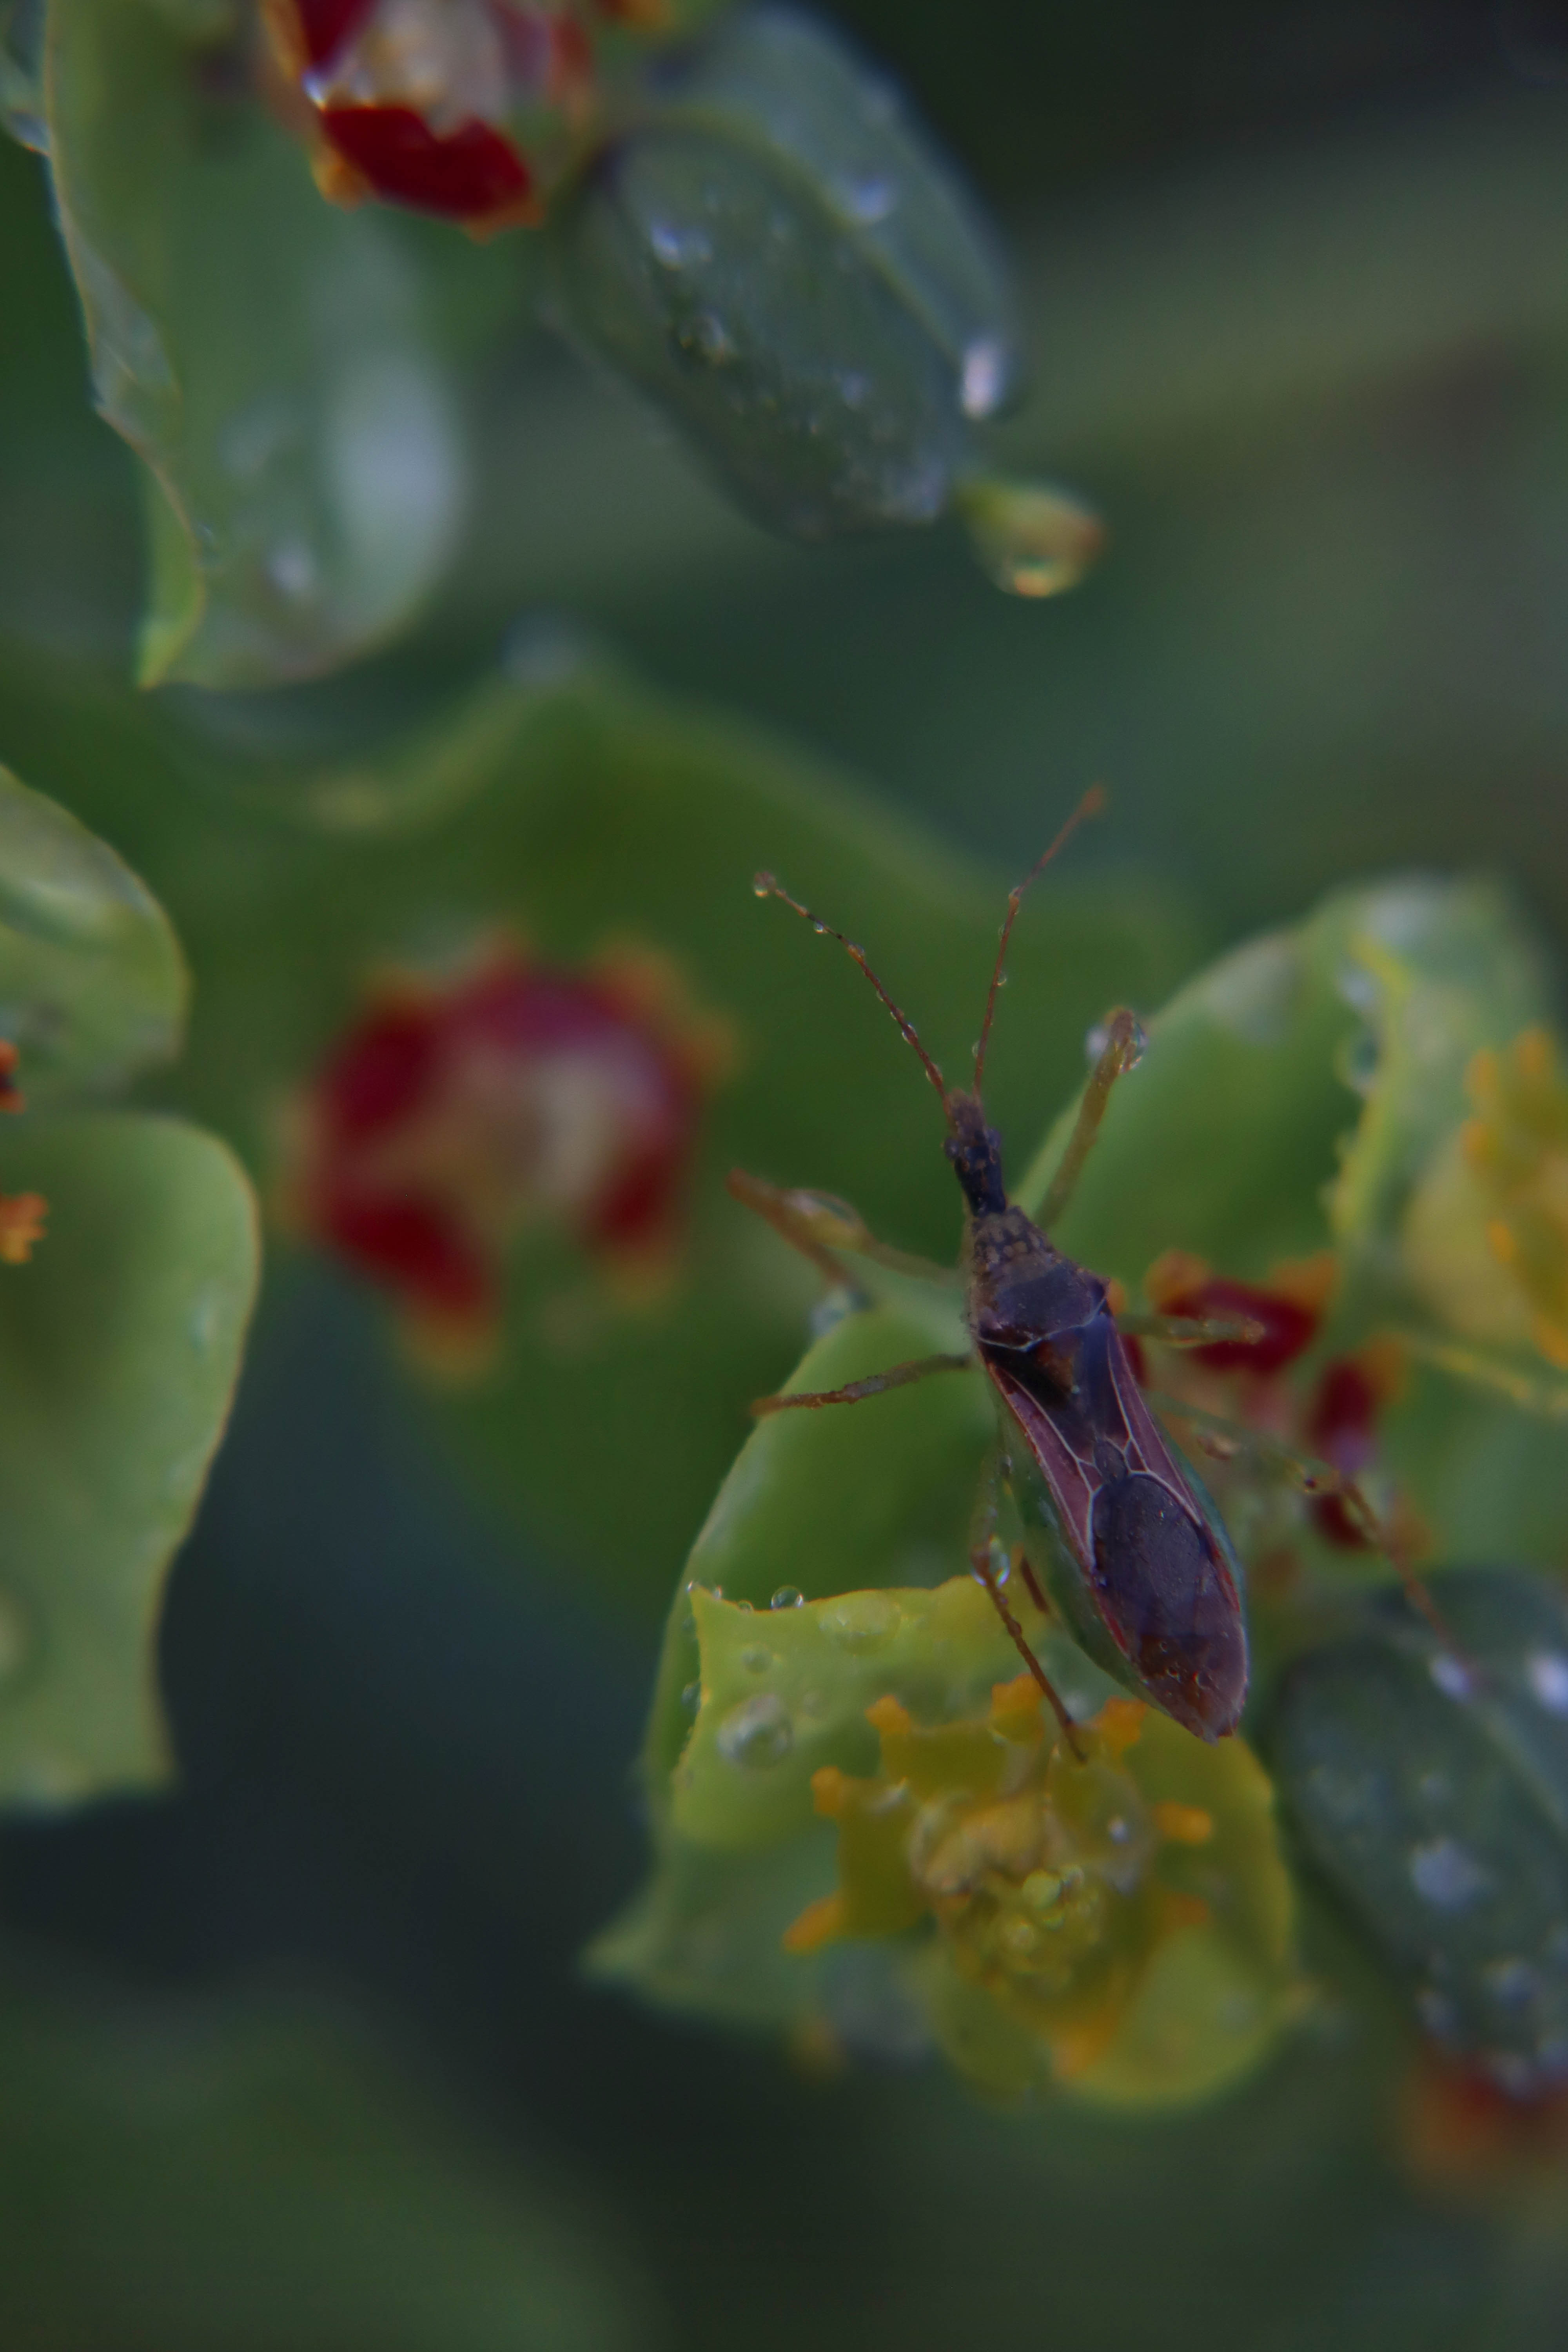 Photo by Ainslie Lowe  |  I took this photo one evening in my backyard as the sun dipped below the horizon. The water on both the leaves and this unique bug created the perfect atmosphere for a moment in nature.